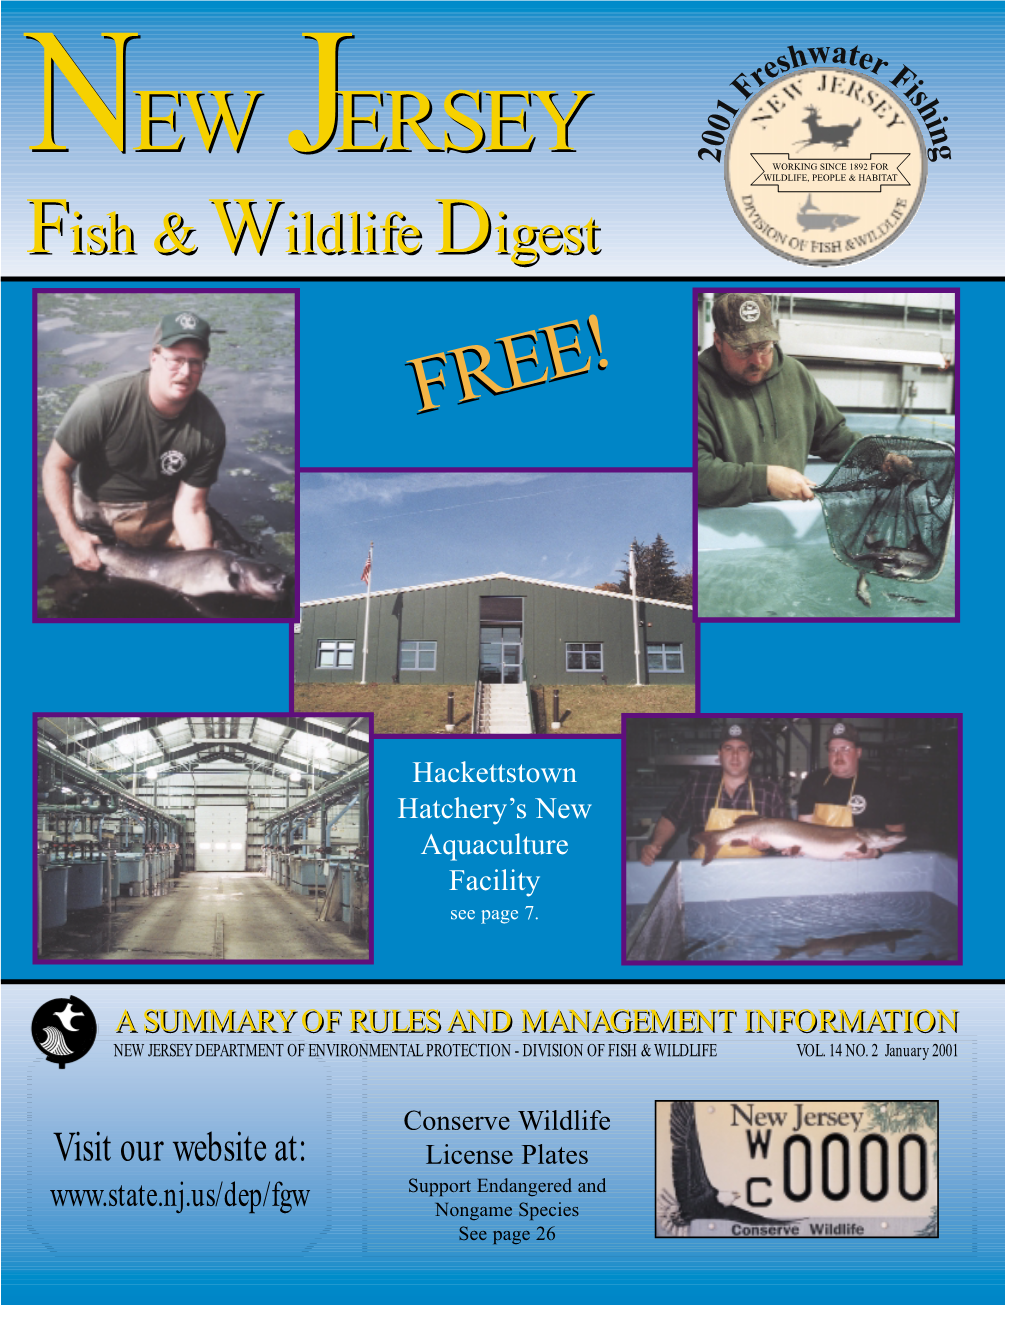 TROUT FISHING REGULATIONS Trout Season and Daily Creel Limit the Trout Season for 2001 Begins at 12:01 A.M., January 1, and Extends to Midnight, March 18, 2001